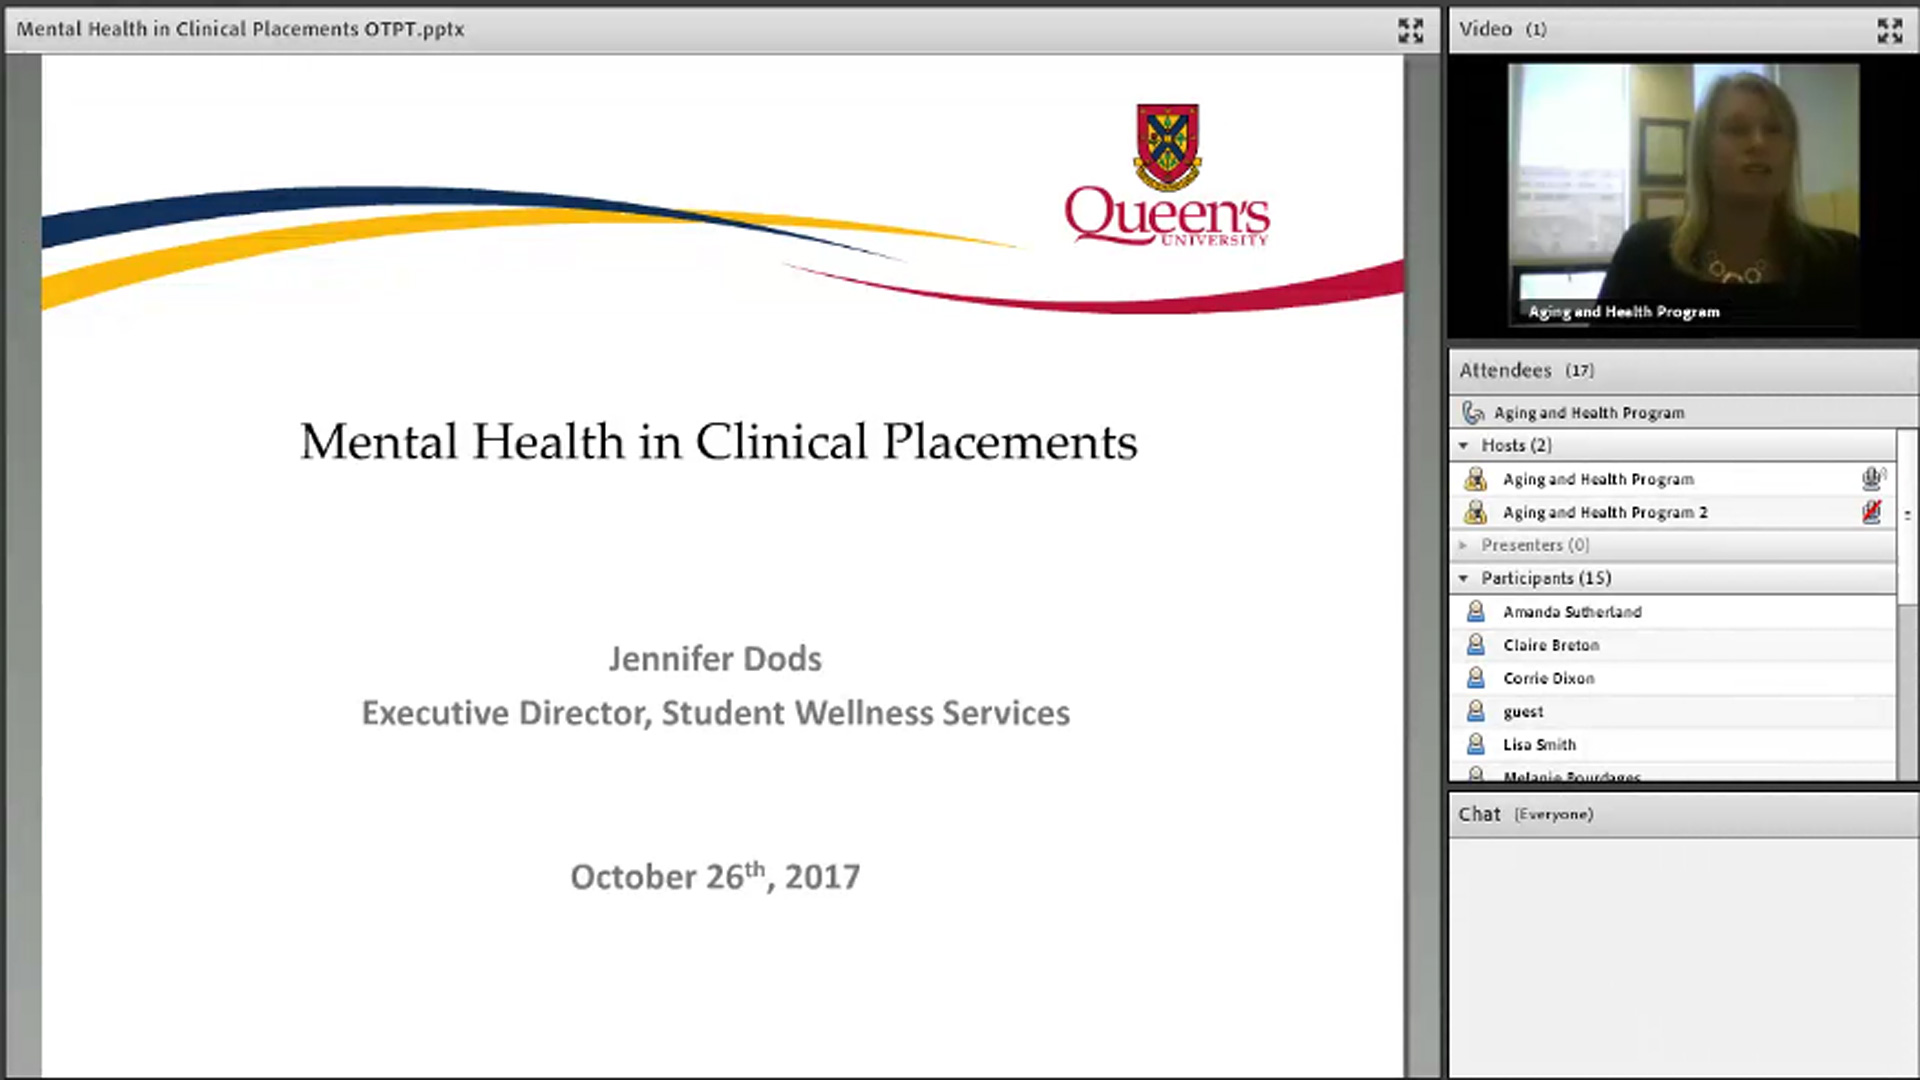 Mental Health in Clinical Placements - not working